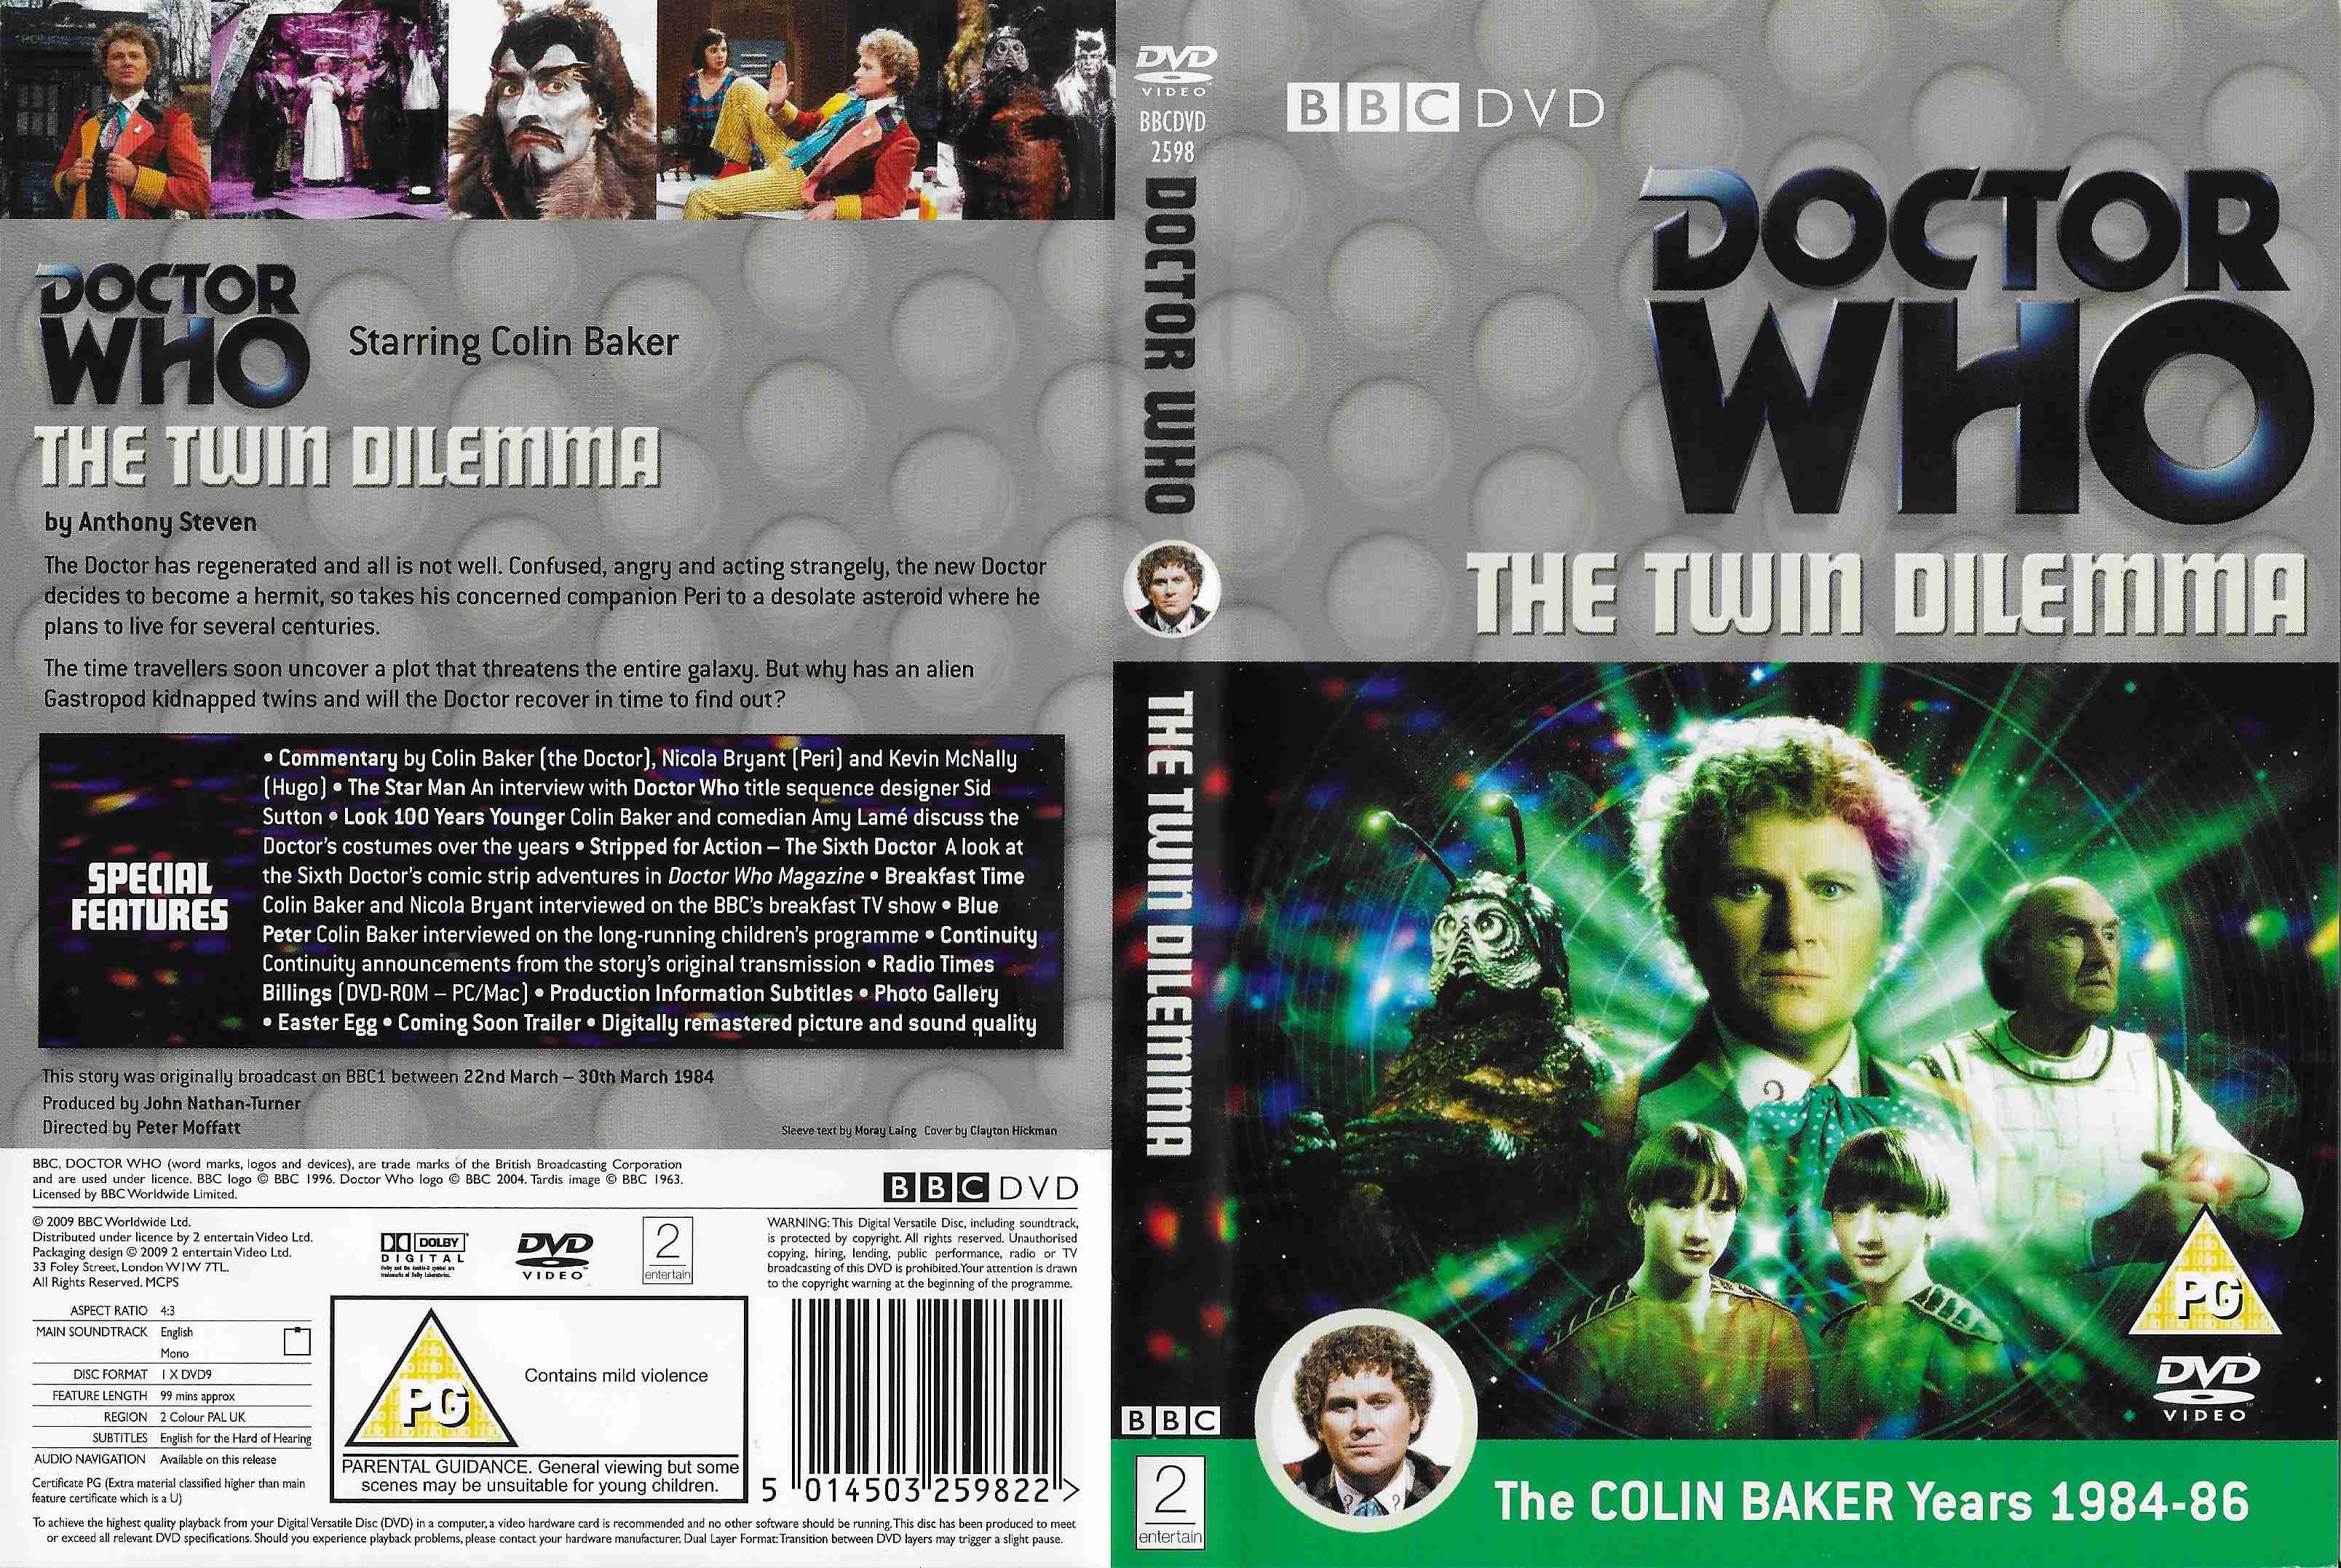 Picture of BBCDVD 2598 Doctor Who - The twin dilemma by artist Anthony Steven from the BBC records and Tapes library